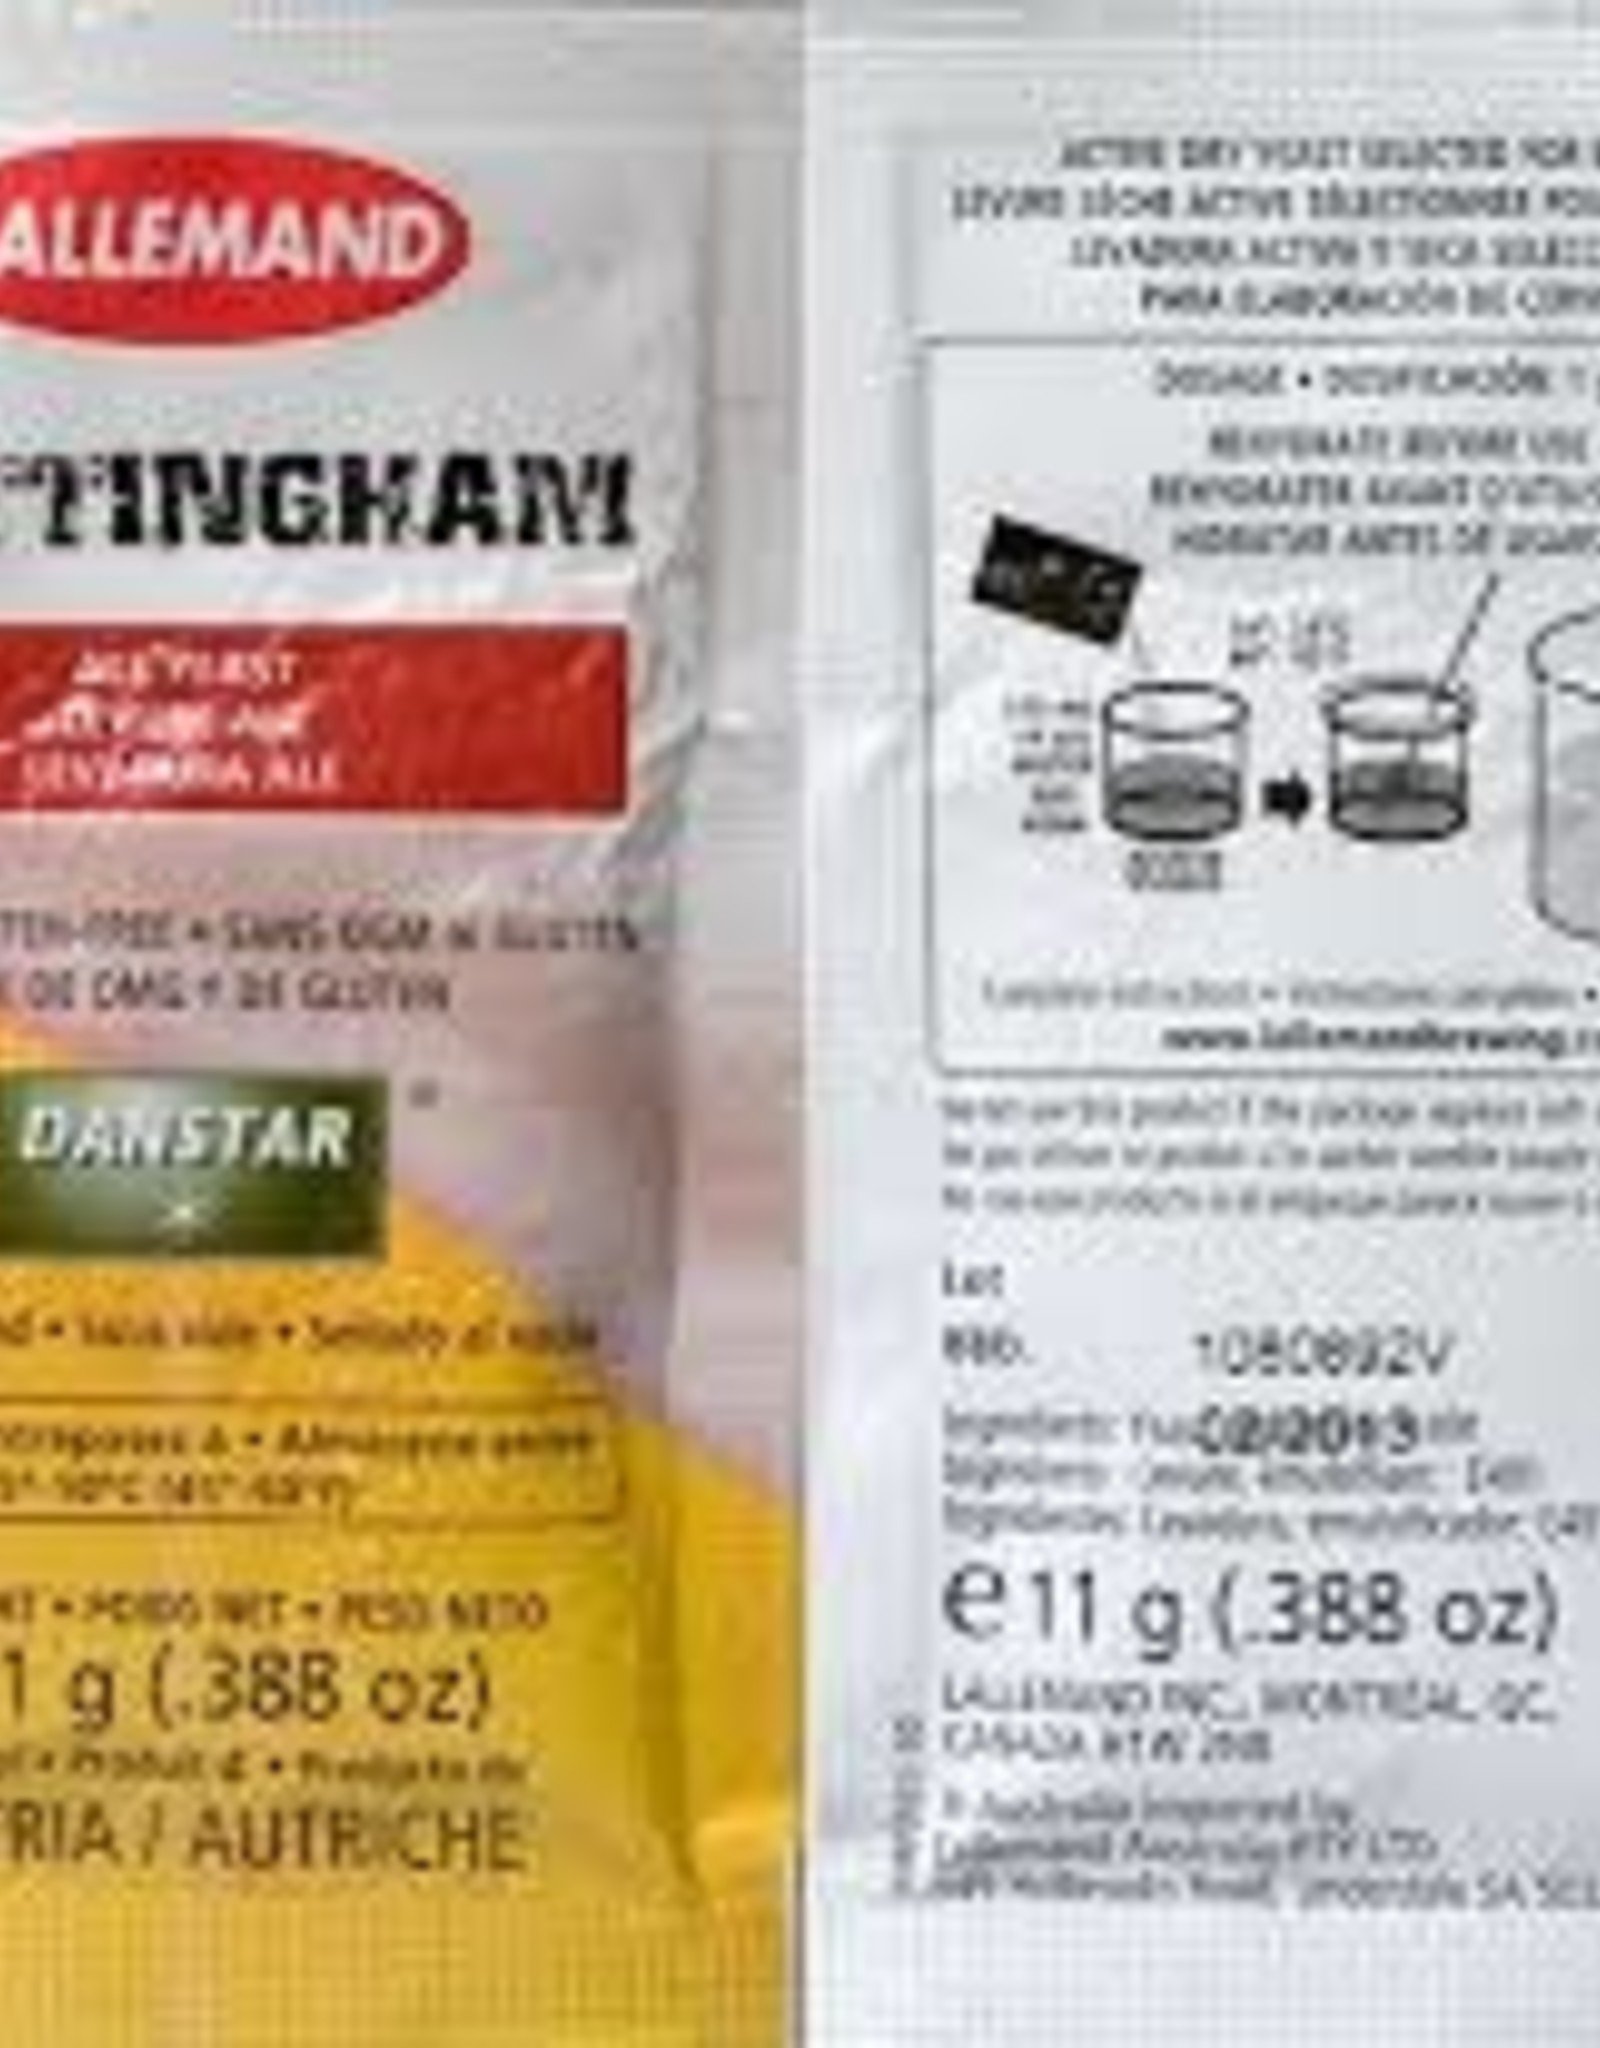 LALLEMAND NOTTINGHAM ALE BREWING YEAST 11 GRAM